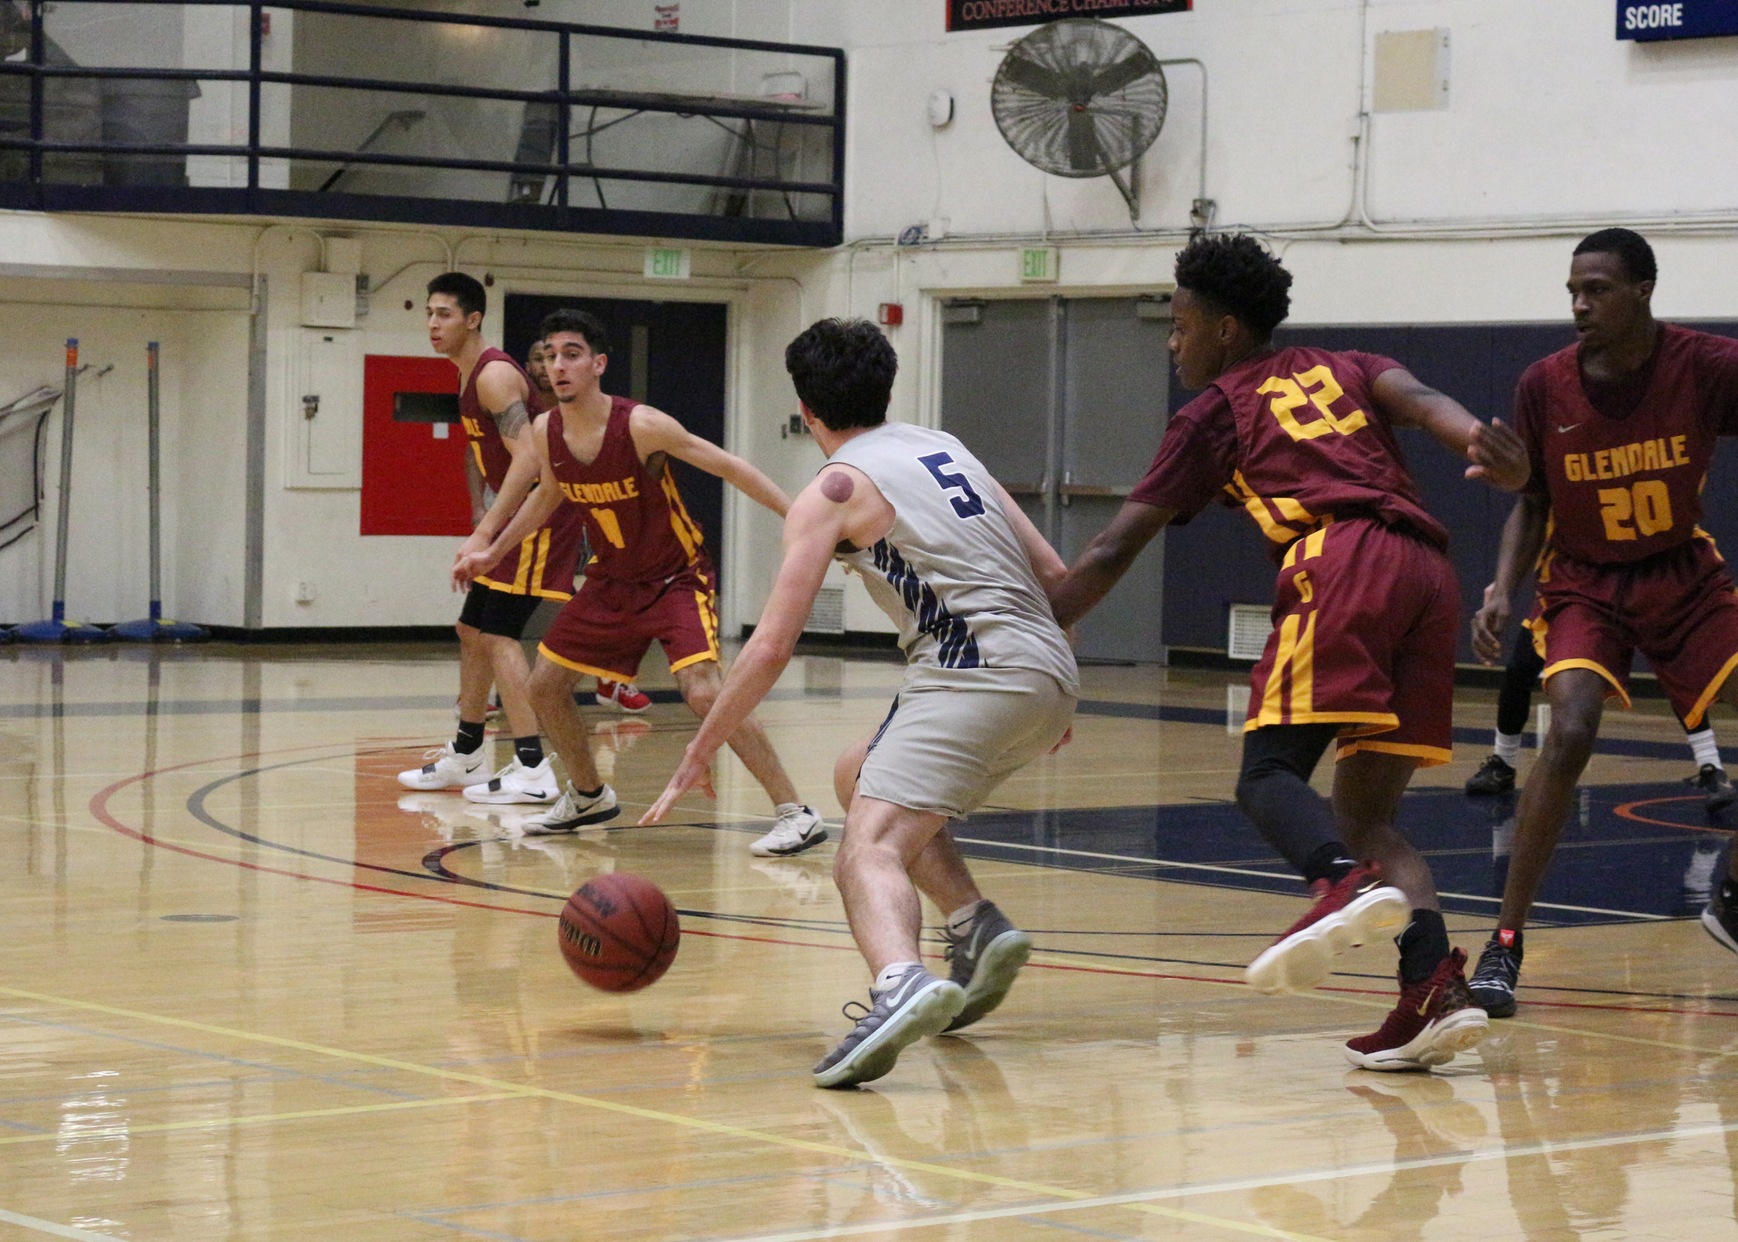 Colby Orr probes the Glendale defense.